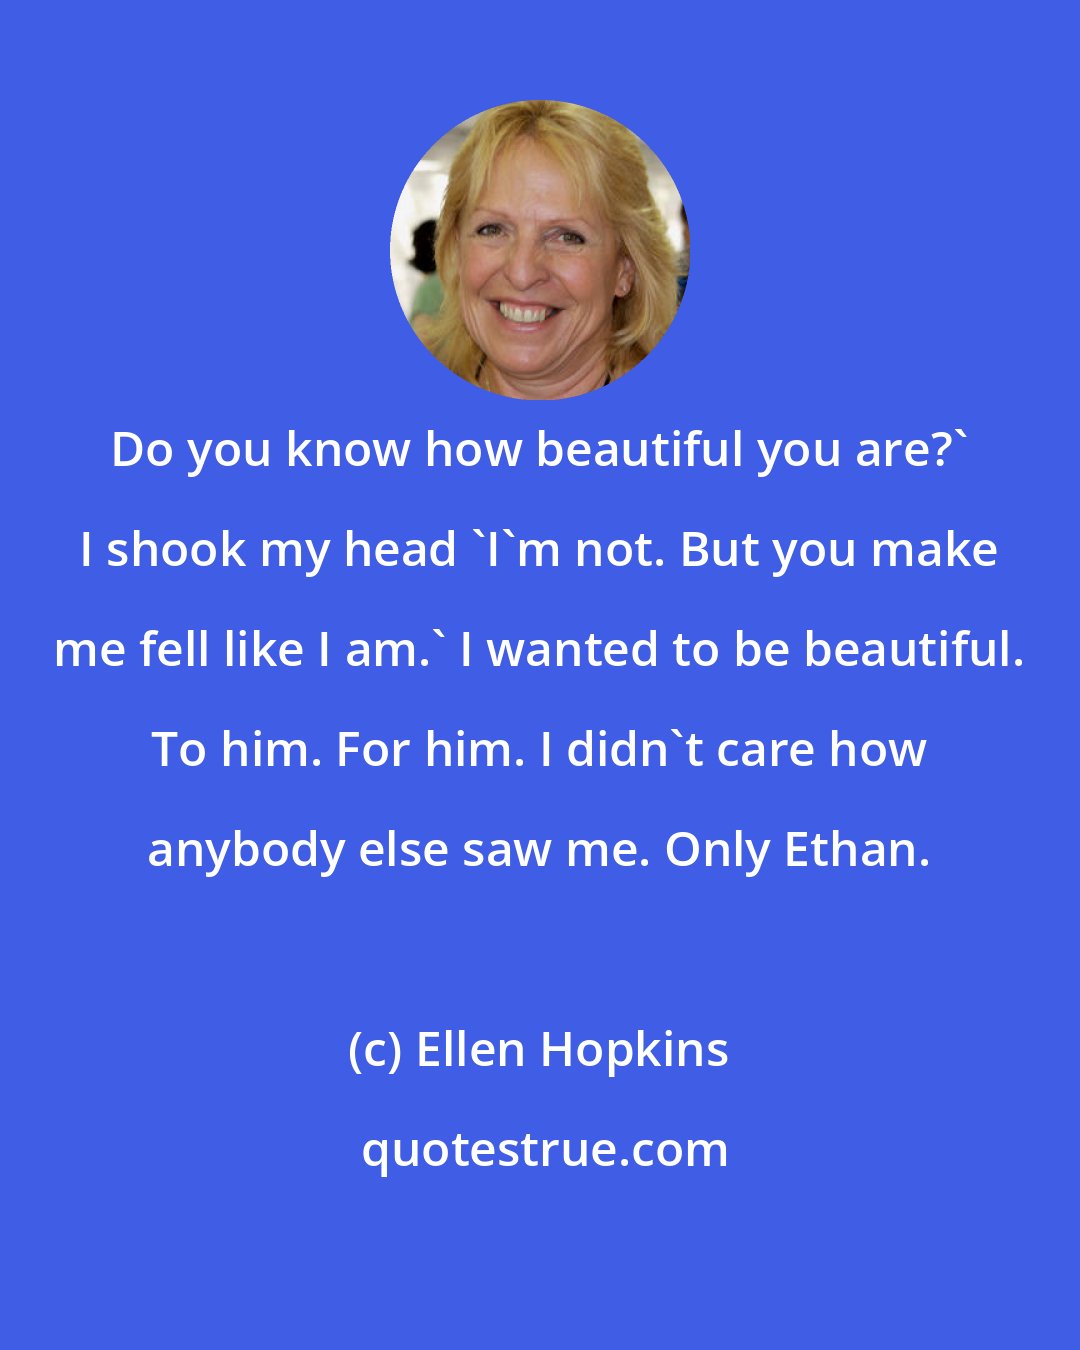 Ellen Hopkins: Do you know how beautiful you are?' I shook my head 'I'm not. But you make me fell like I am.' I wanted to be beautiful. To him. For him. I didn't care how anybody else saw me. Only Ethan.